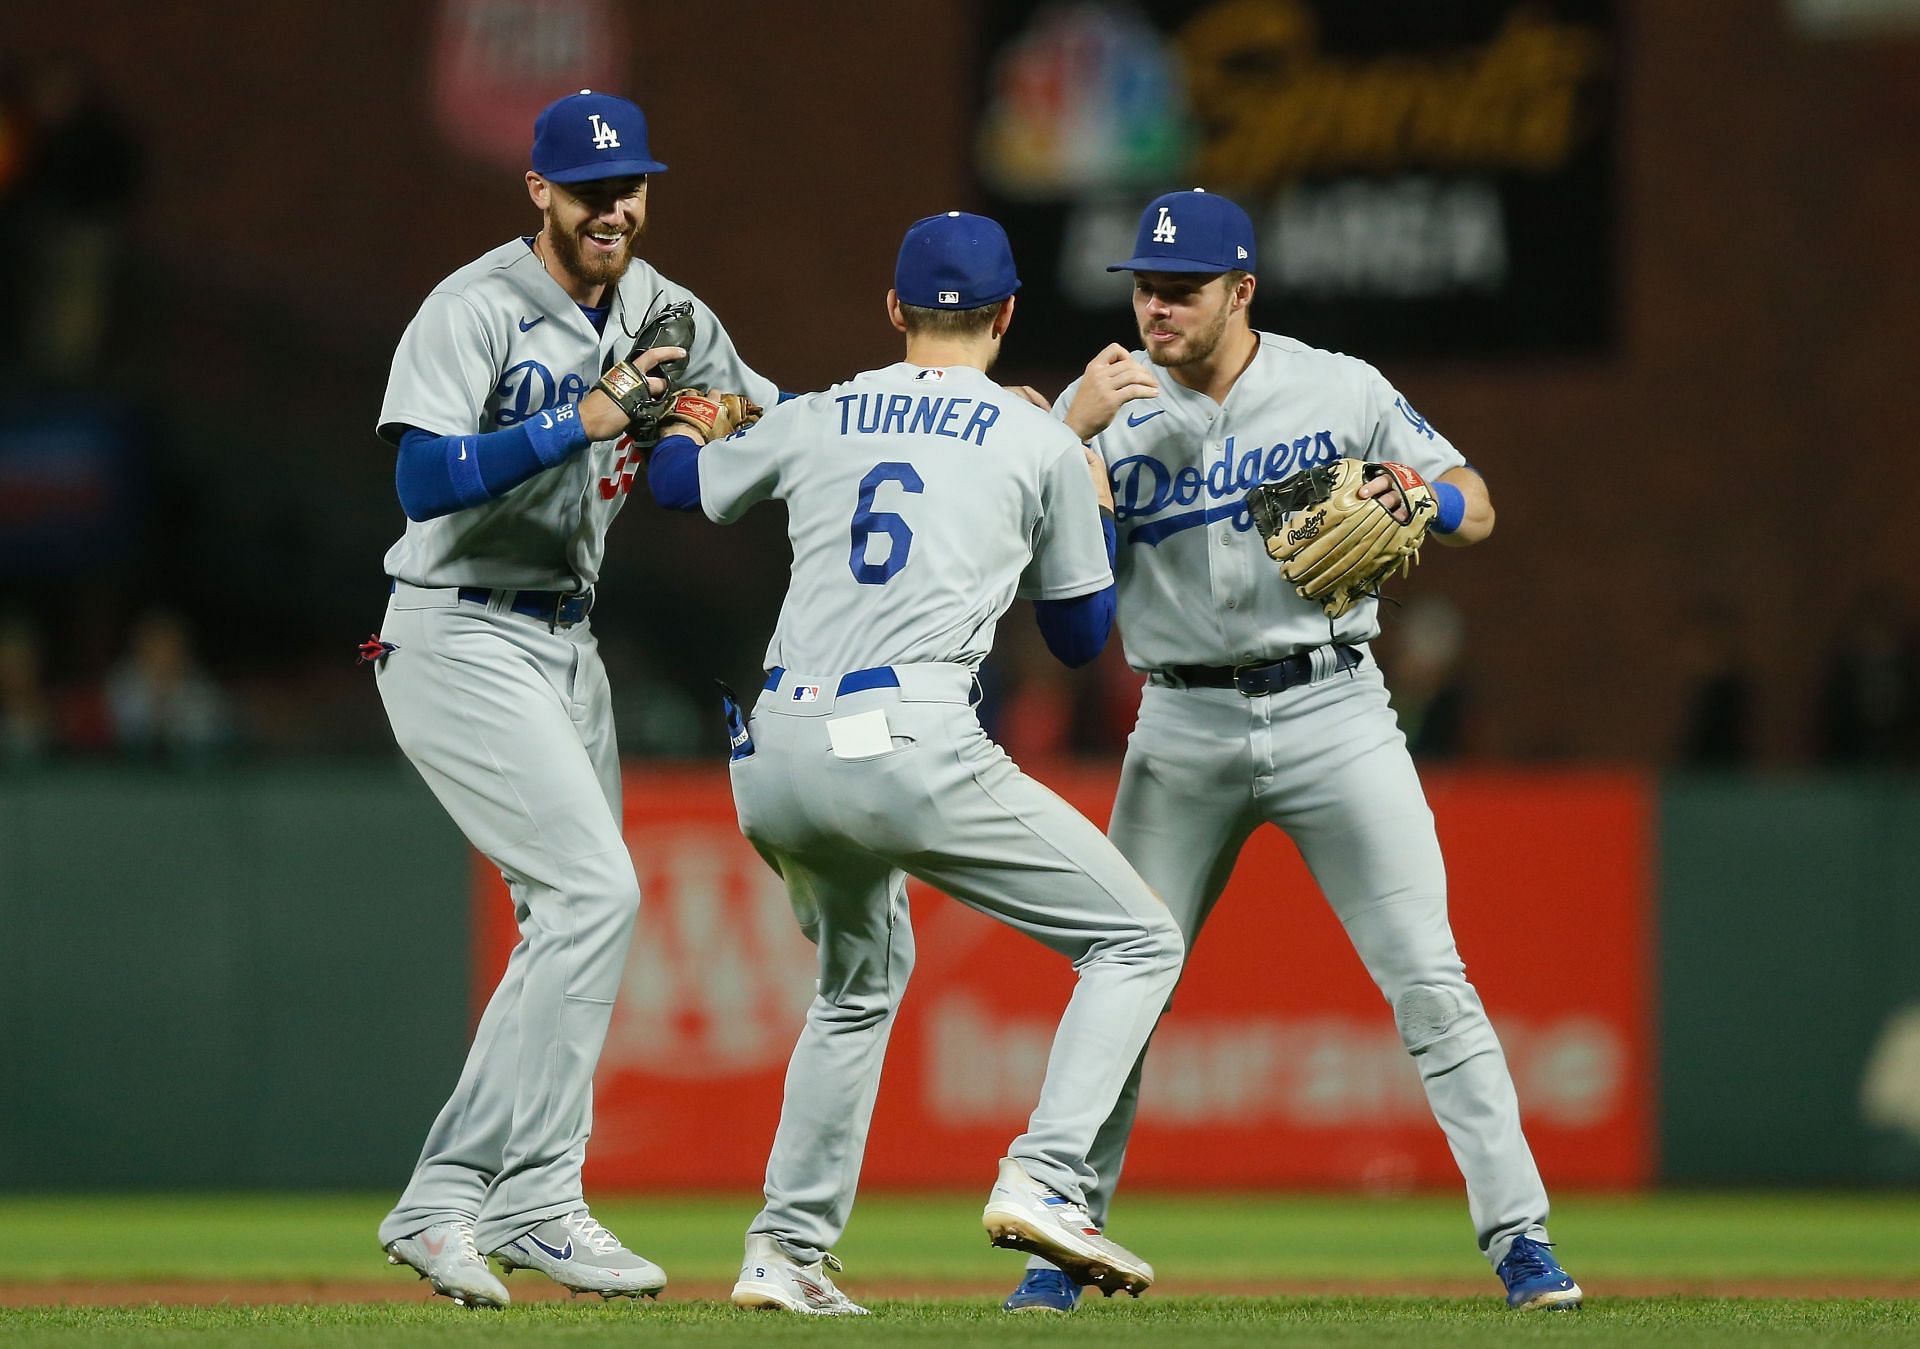 Dodgers celebrate after a win.